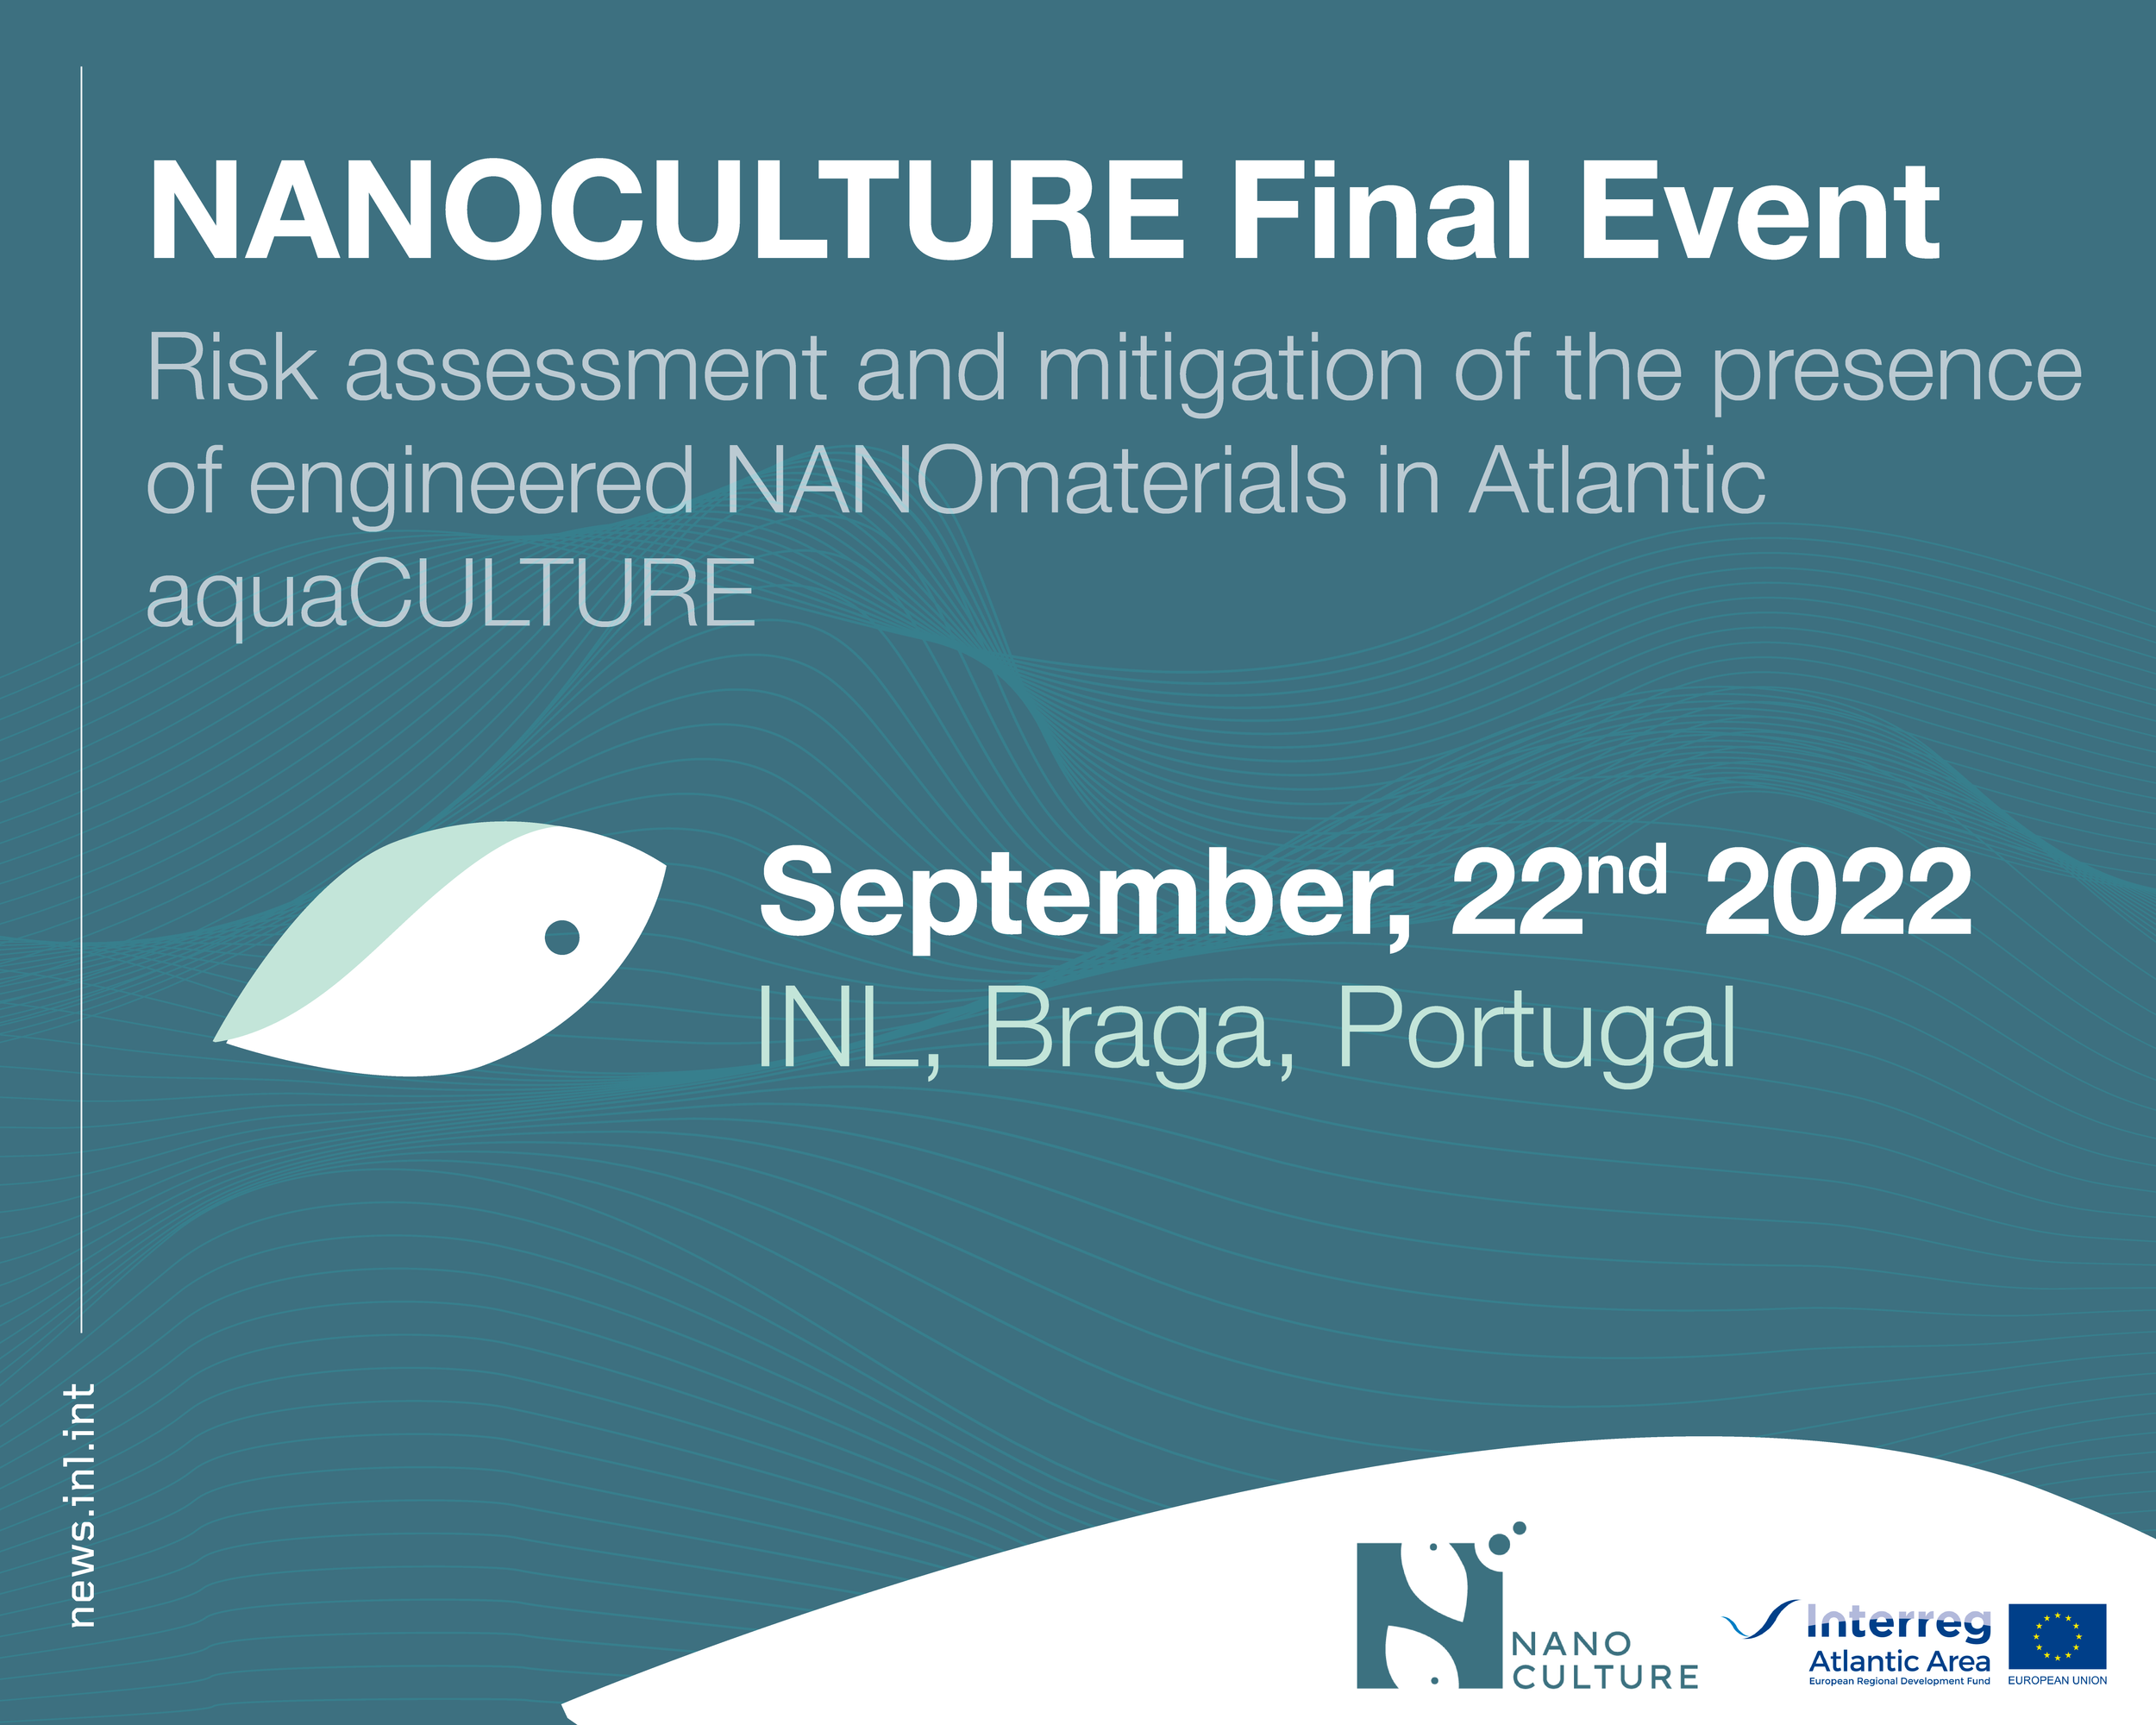 NANOCULTURE final event “Risk assessment and mitigation of the presence of engineered NANOmaterials in Atlantic  aquaCULTURE”